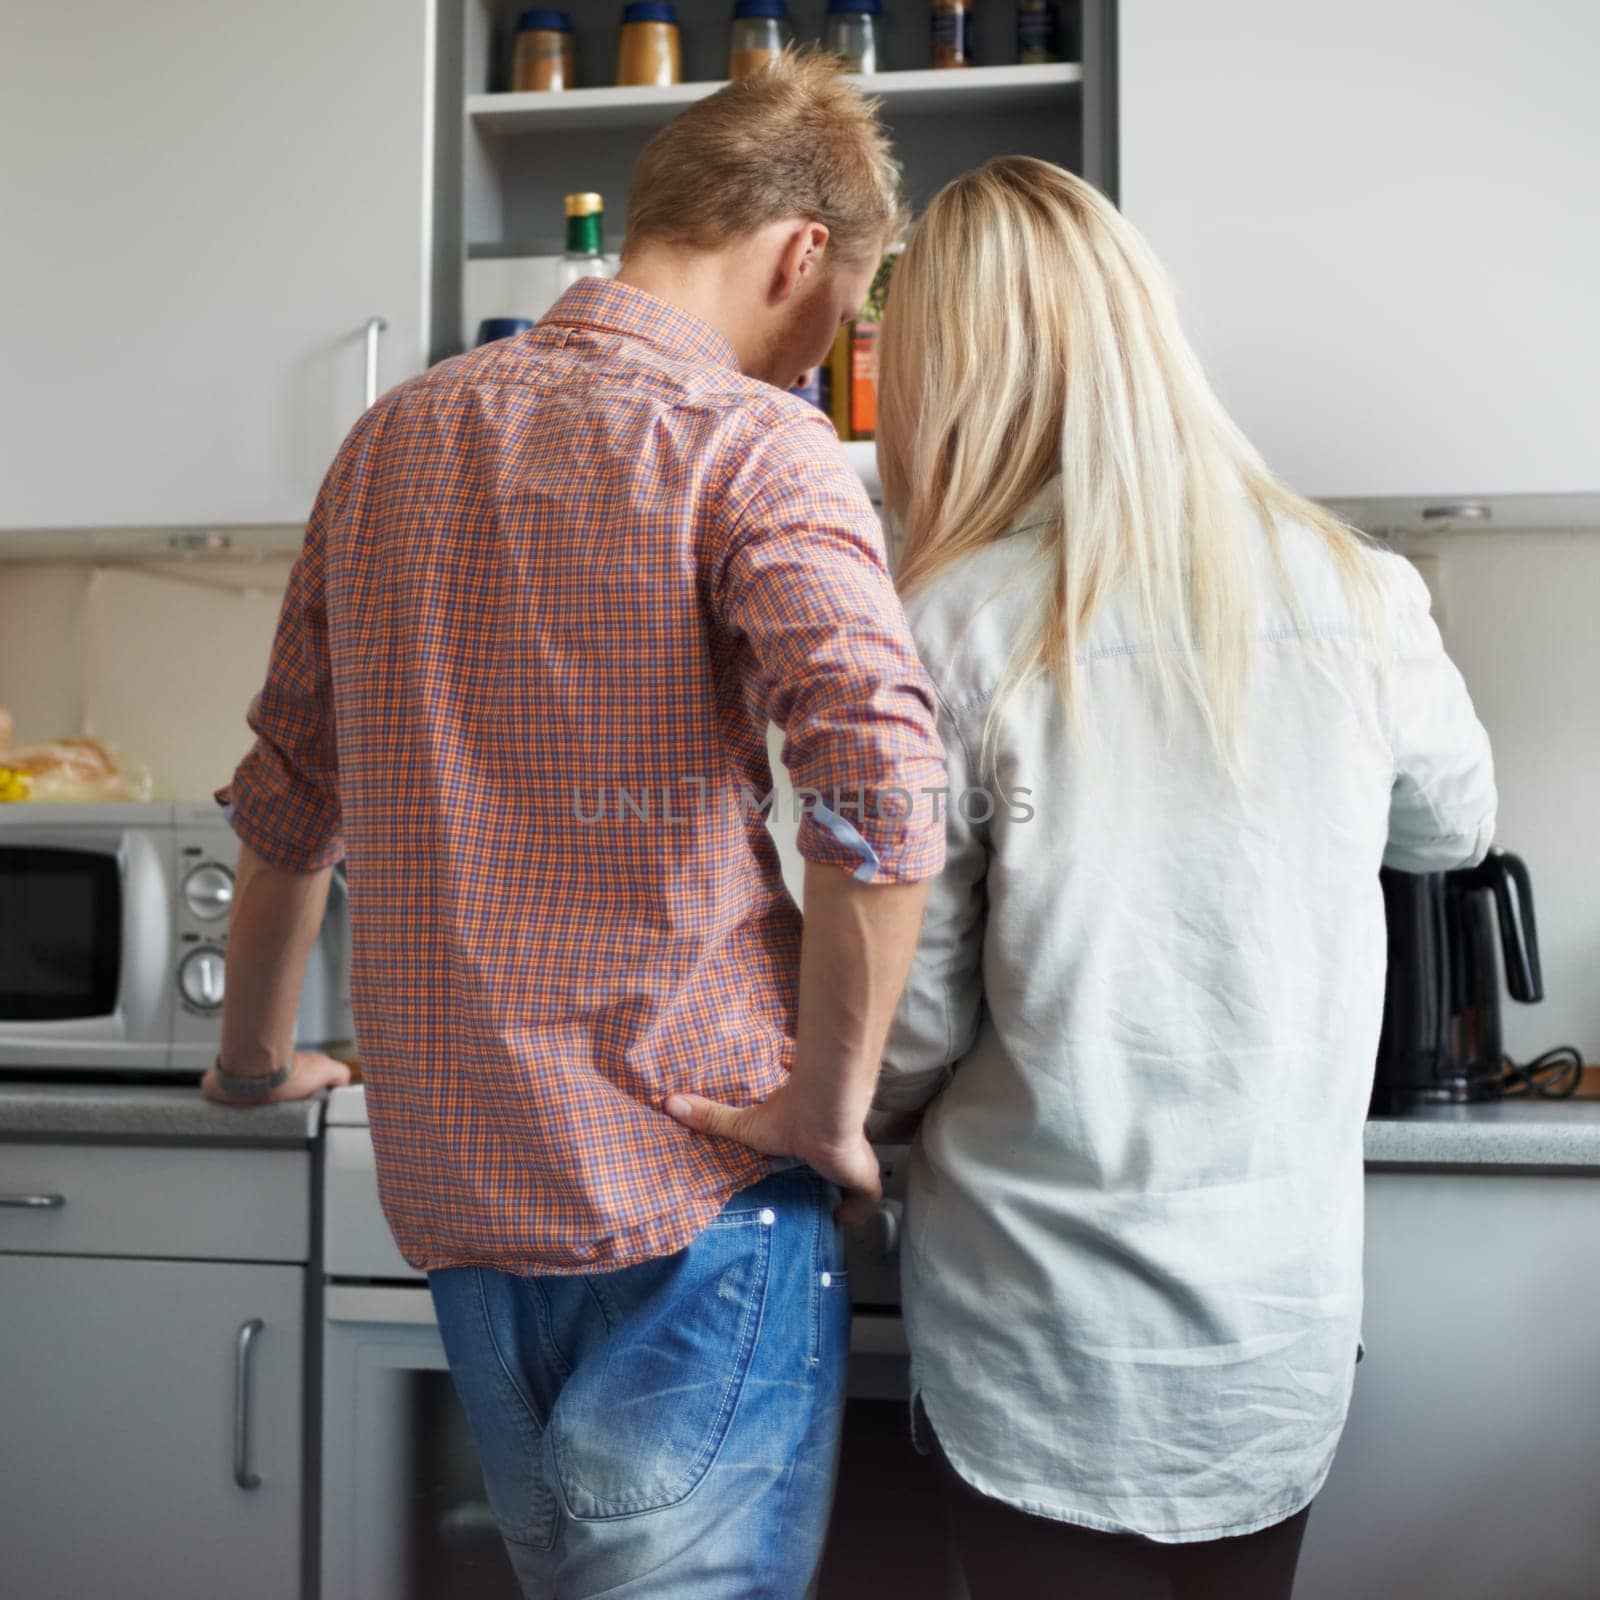 Cooking, back and couple in a kitchen for breakfast, meal or bonding at home together. Love, food and rear view of people in a house for meal prep, brunch or preparing dinner on weekend or day off by YuriArcurs